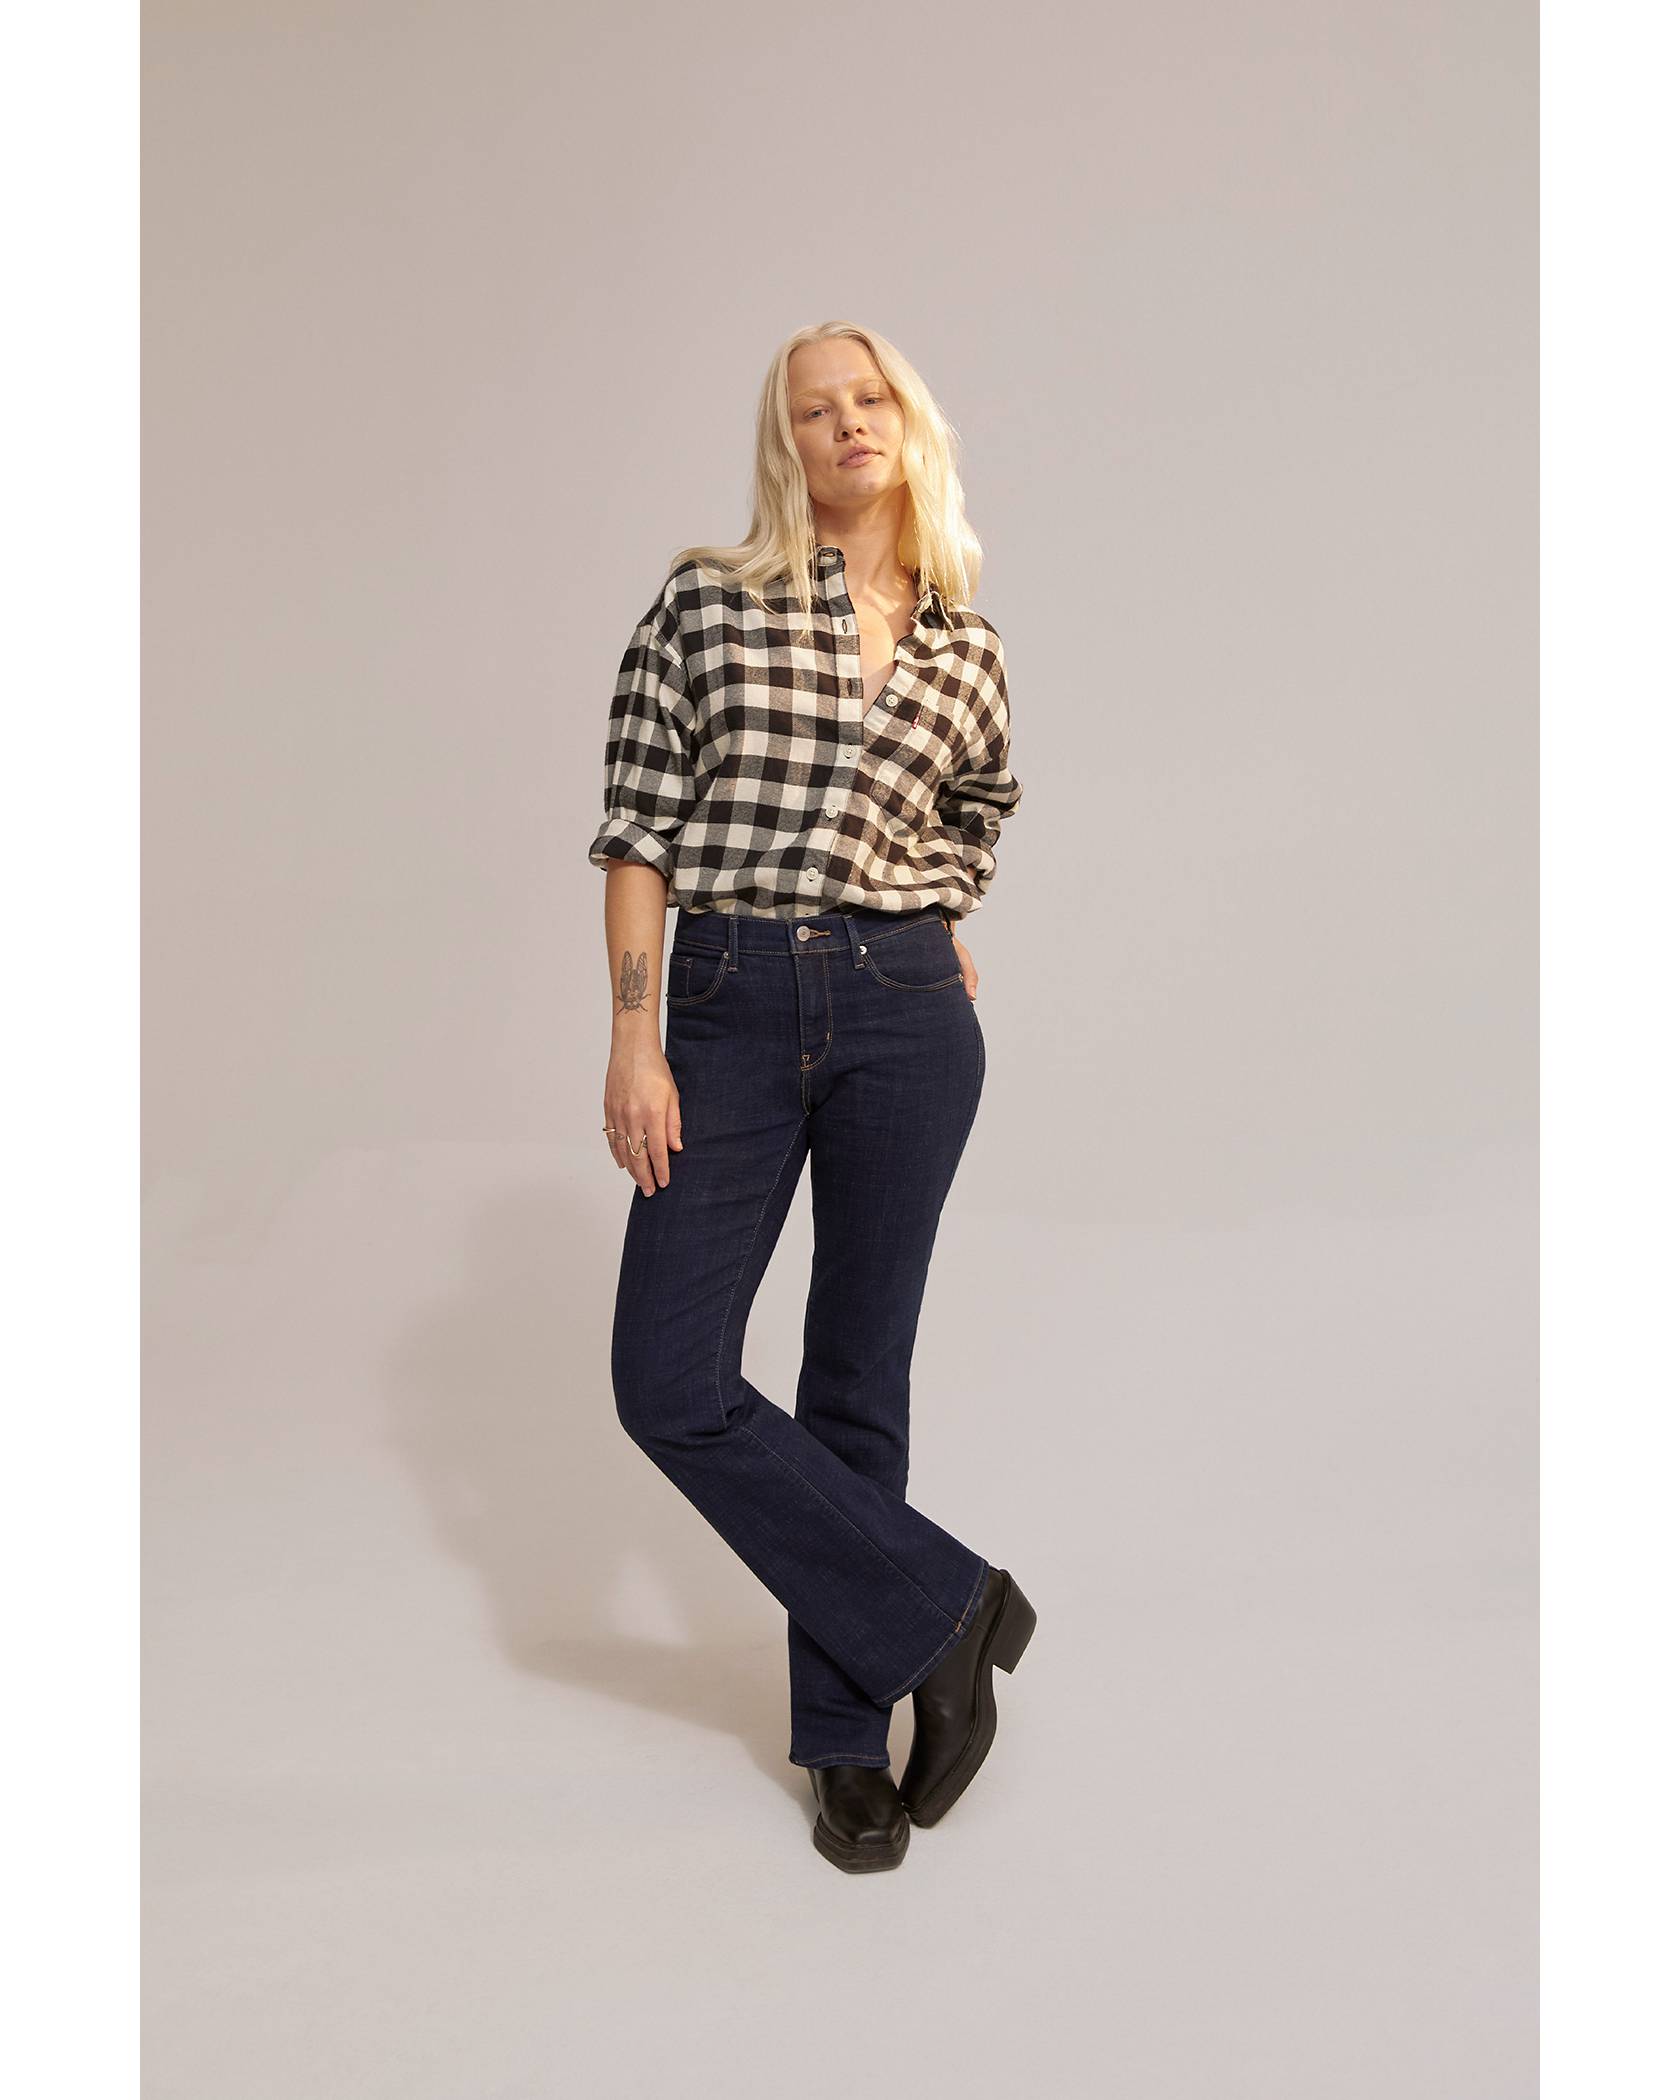 Model wearing black and white gingham shirt and dark wash jeans